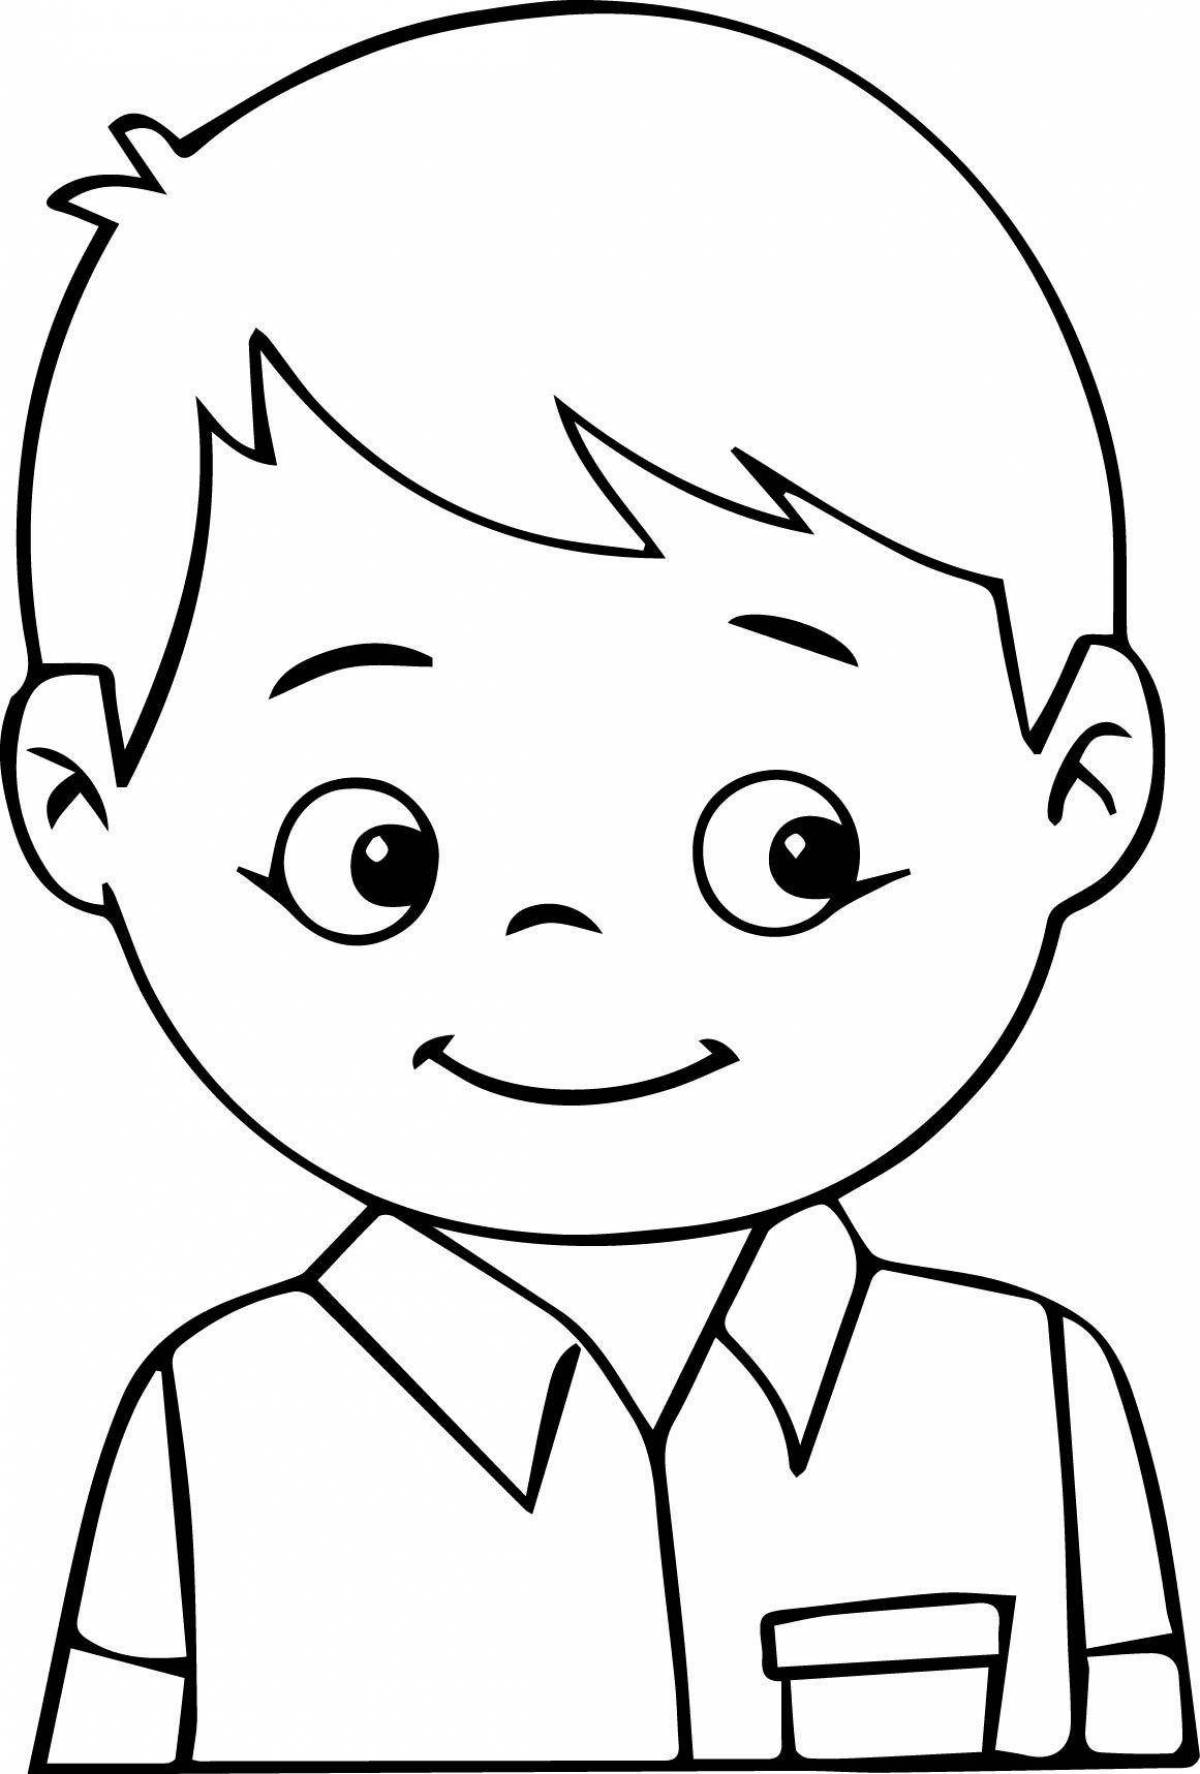 Human face for kids #8